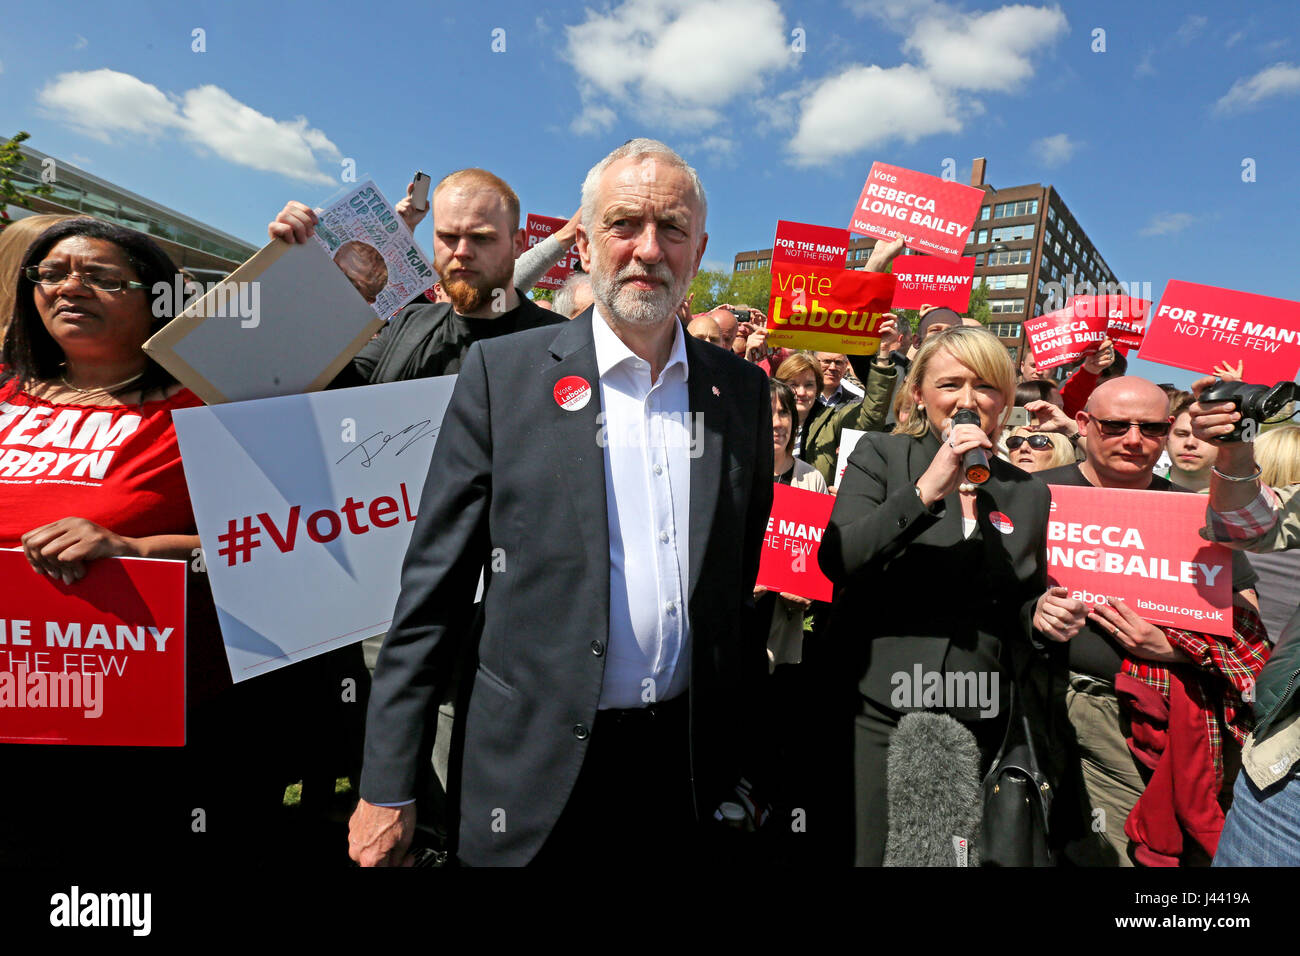 Salford, UK. 9th May, 2017. Rebecca Long Bailey introduces and welcomes the Labour Party leader, Jeremy Corbyn, the precinct, Salford, 5th May, 2017 Credit: Barbara Cook/Alamy Live News Stock Photo